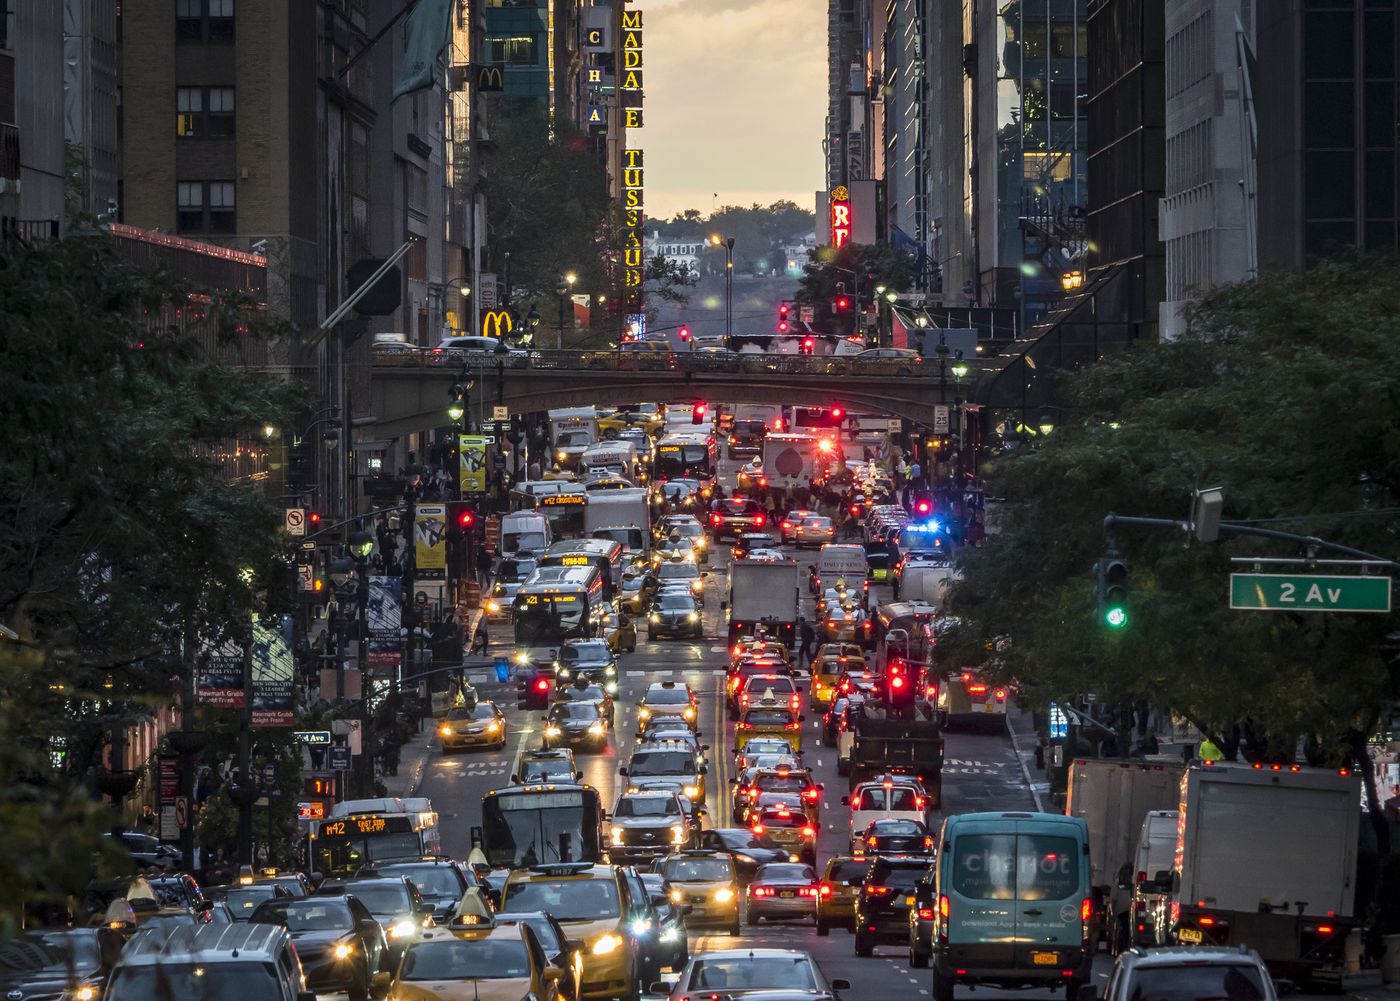 Gridlock alert days coming to NYC